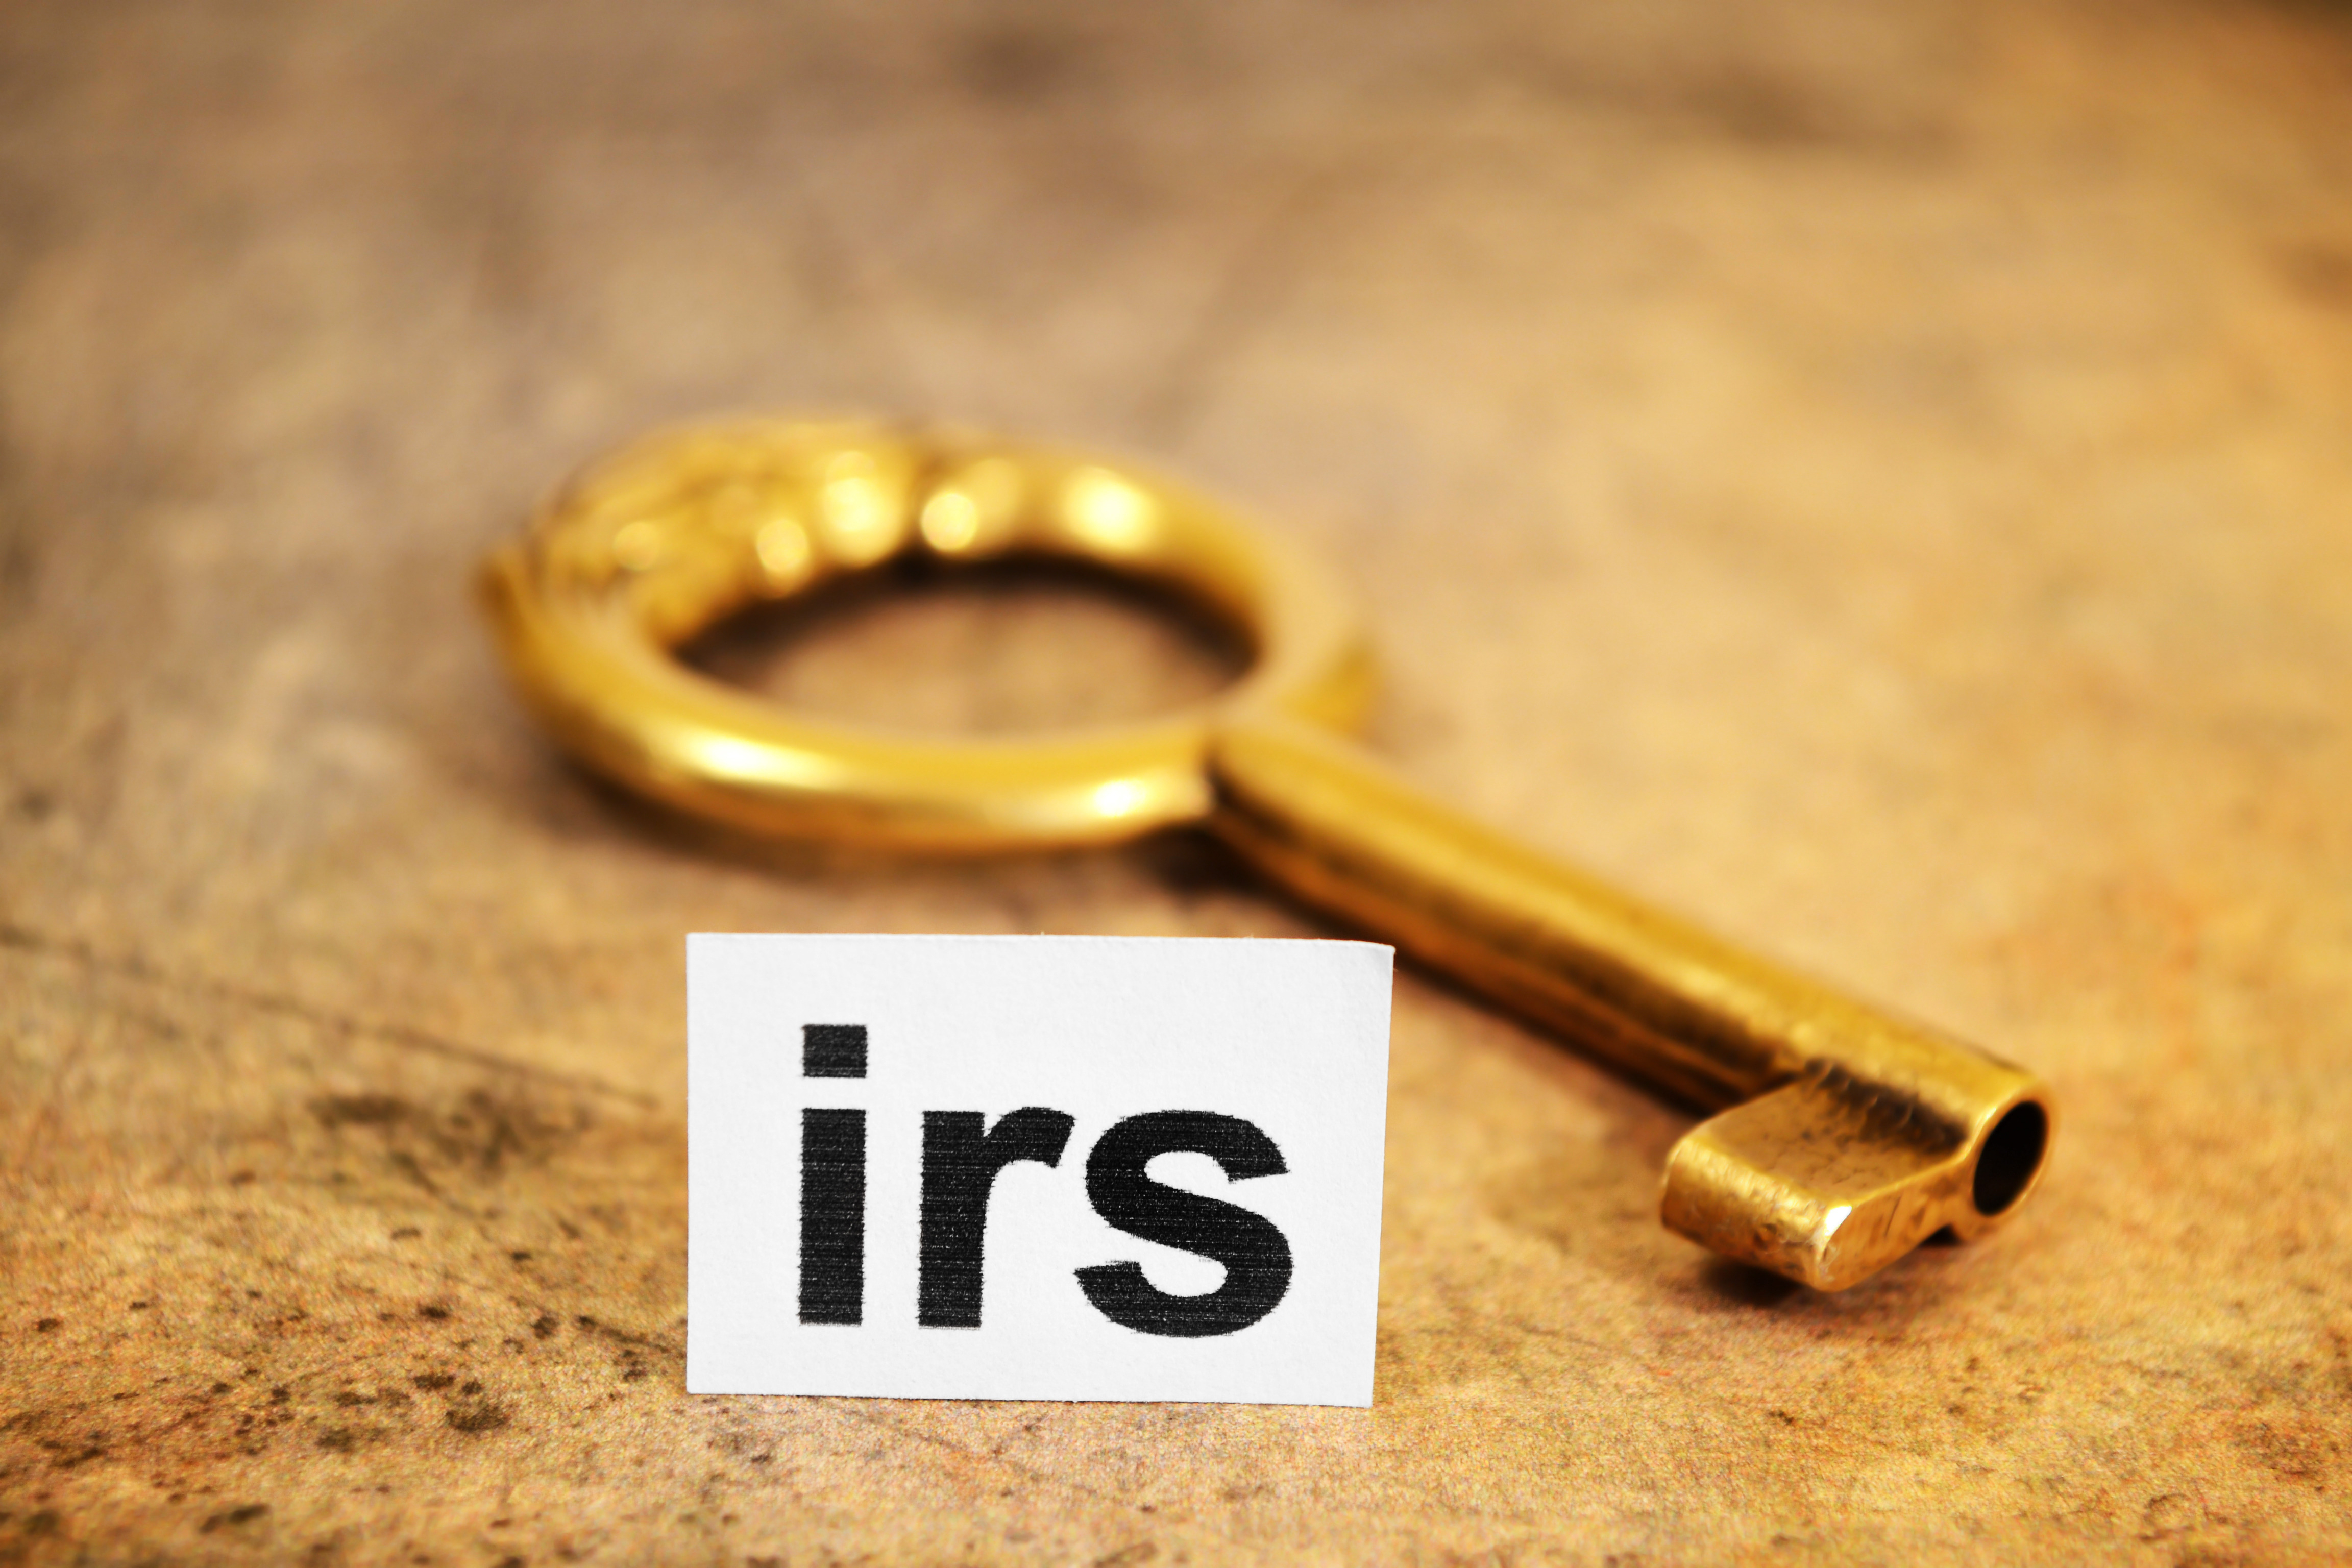 Irs and key concept